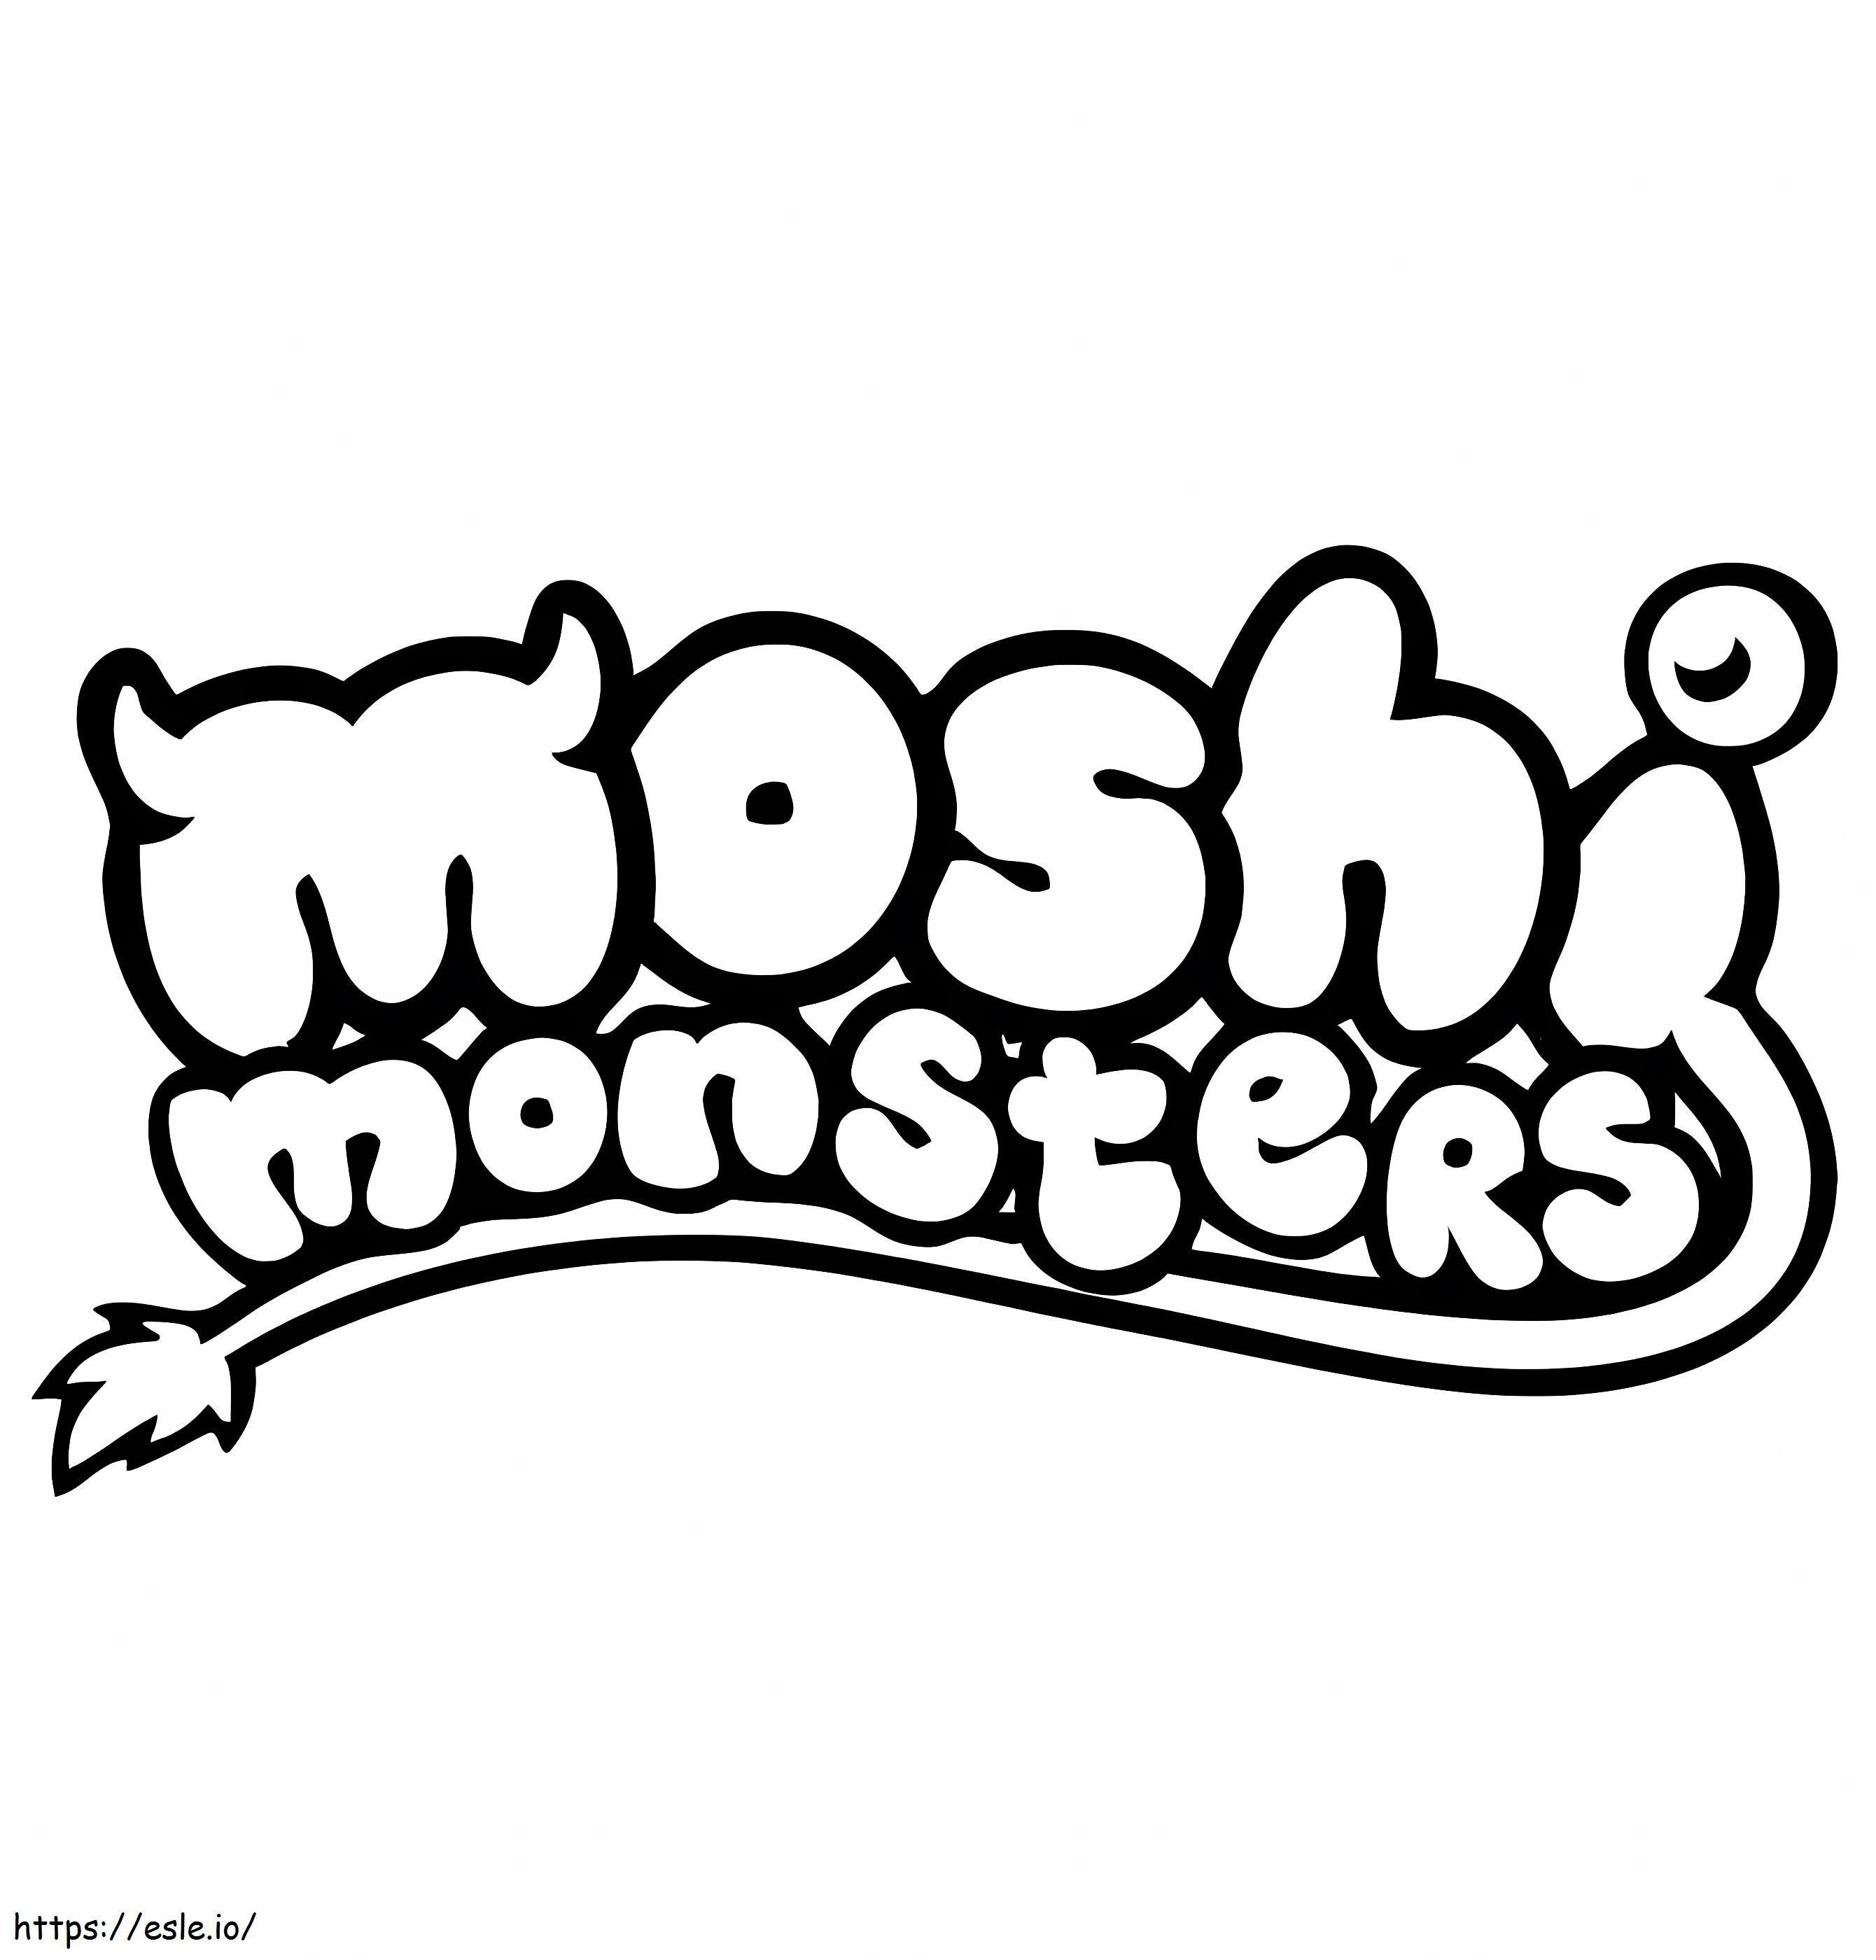 Logo Moshi Monsters coloring page